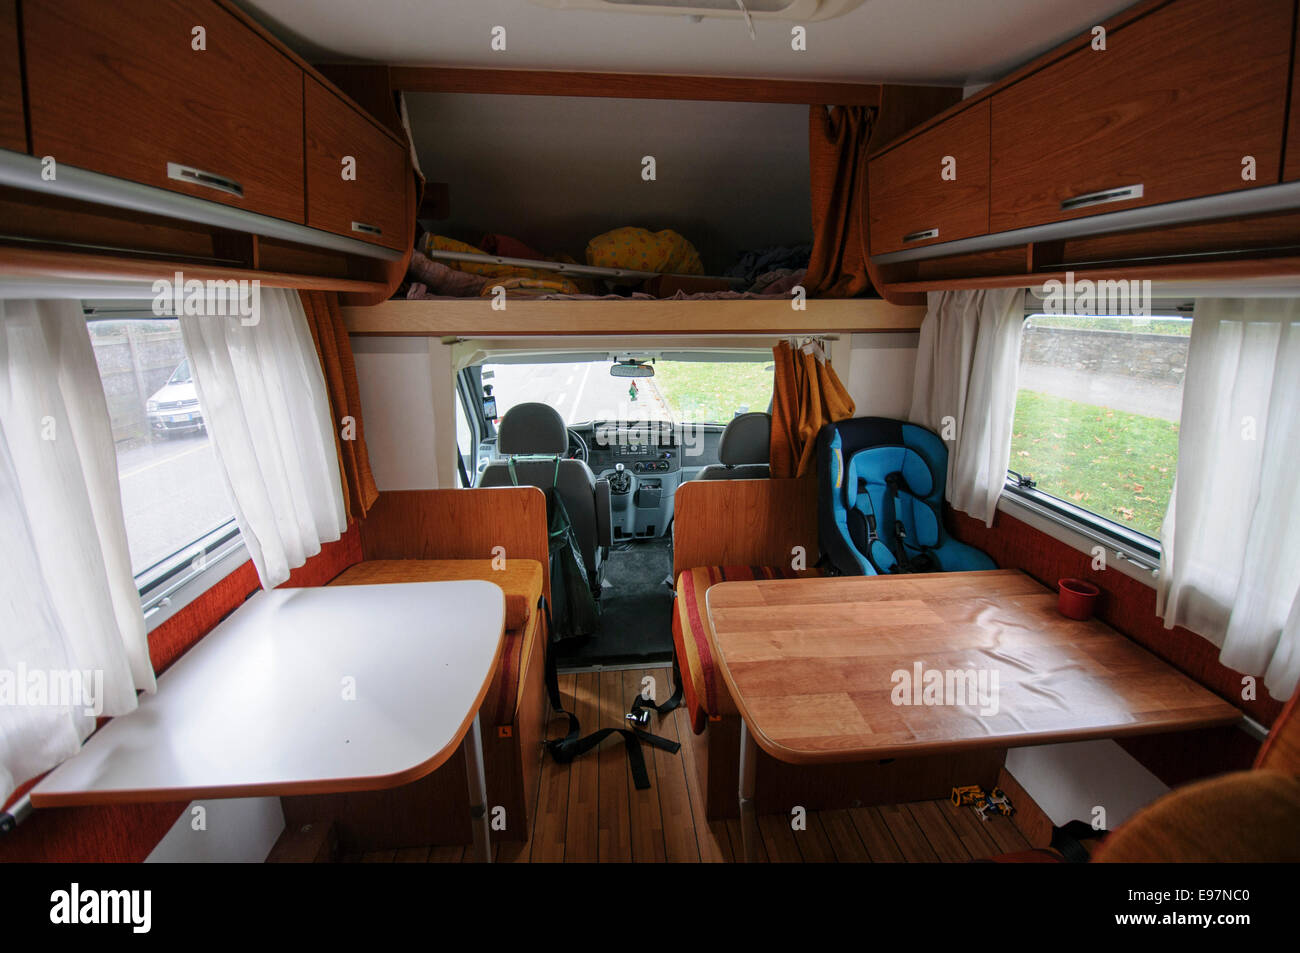 interior of a mobile motor home Stock Photo